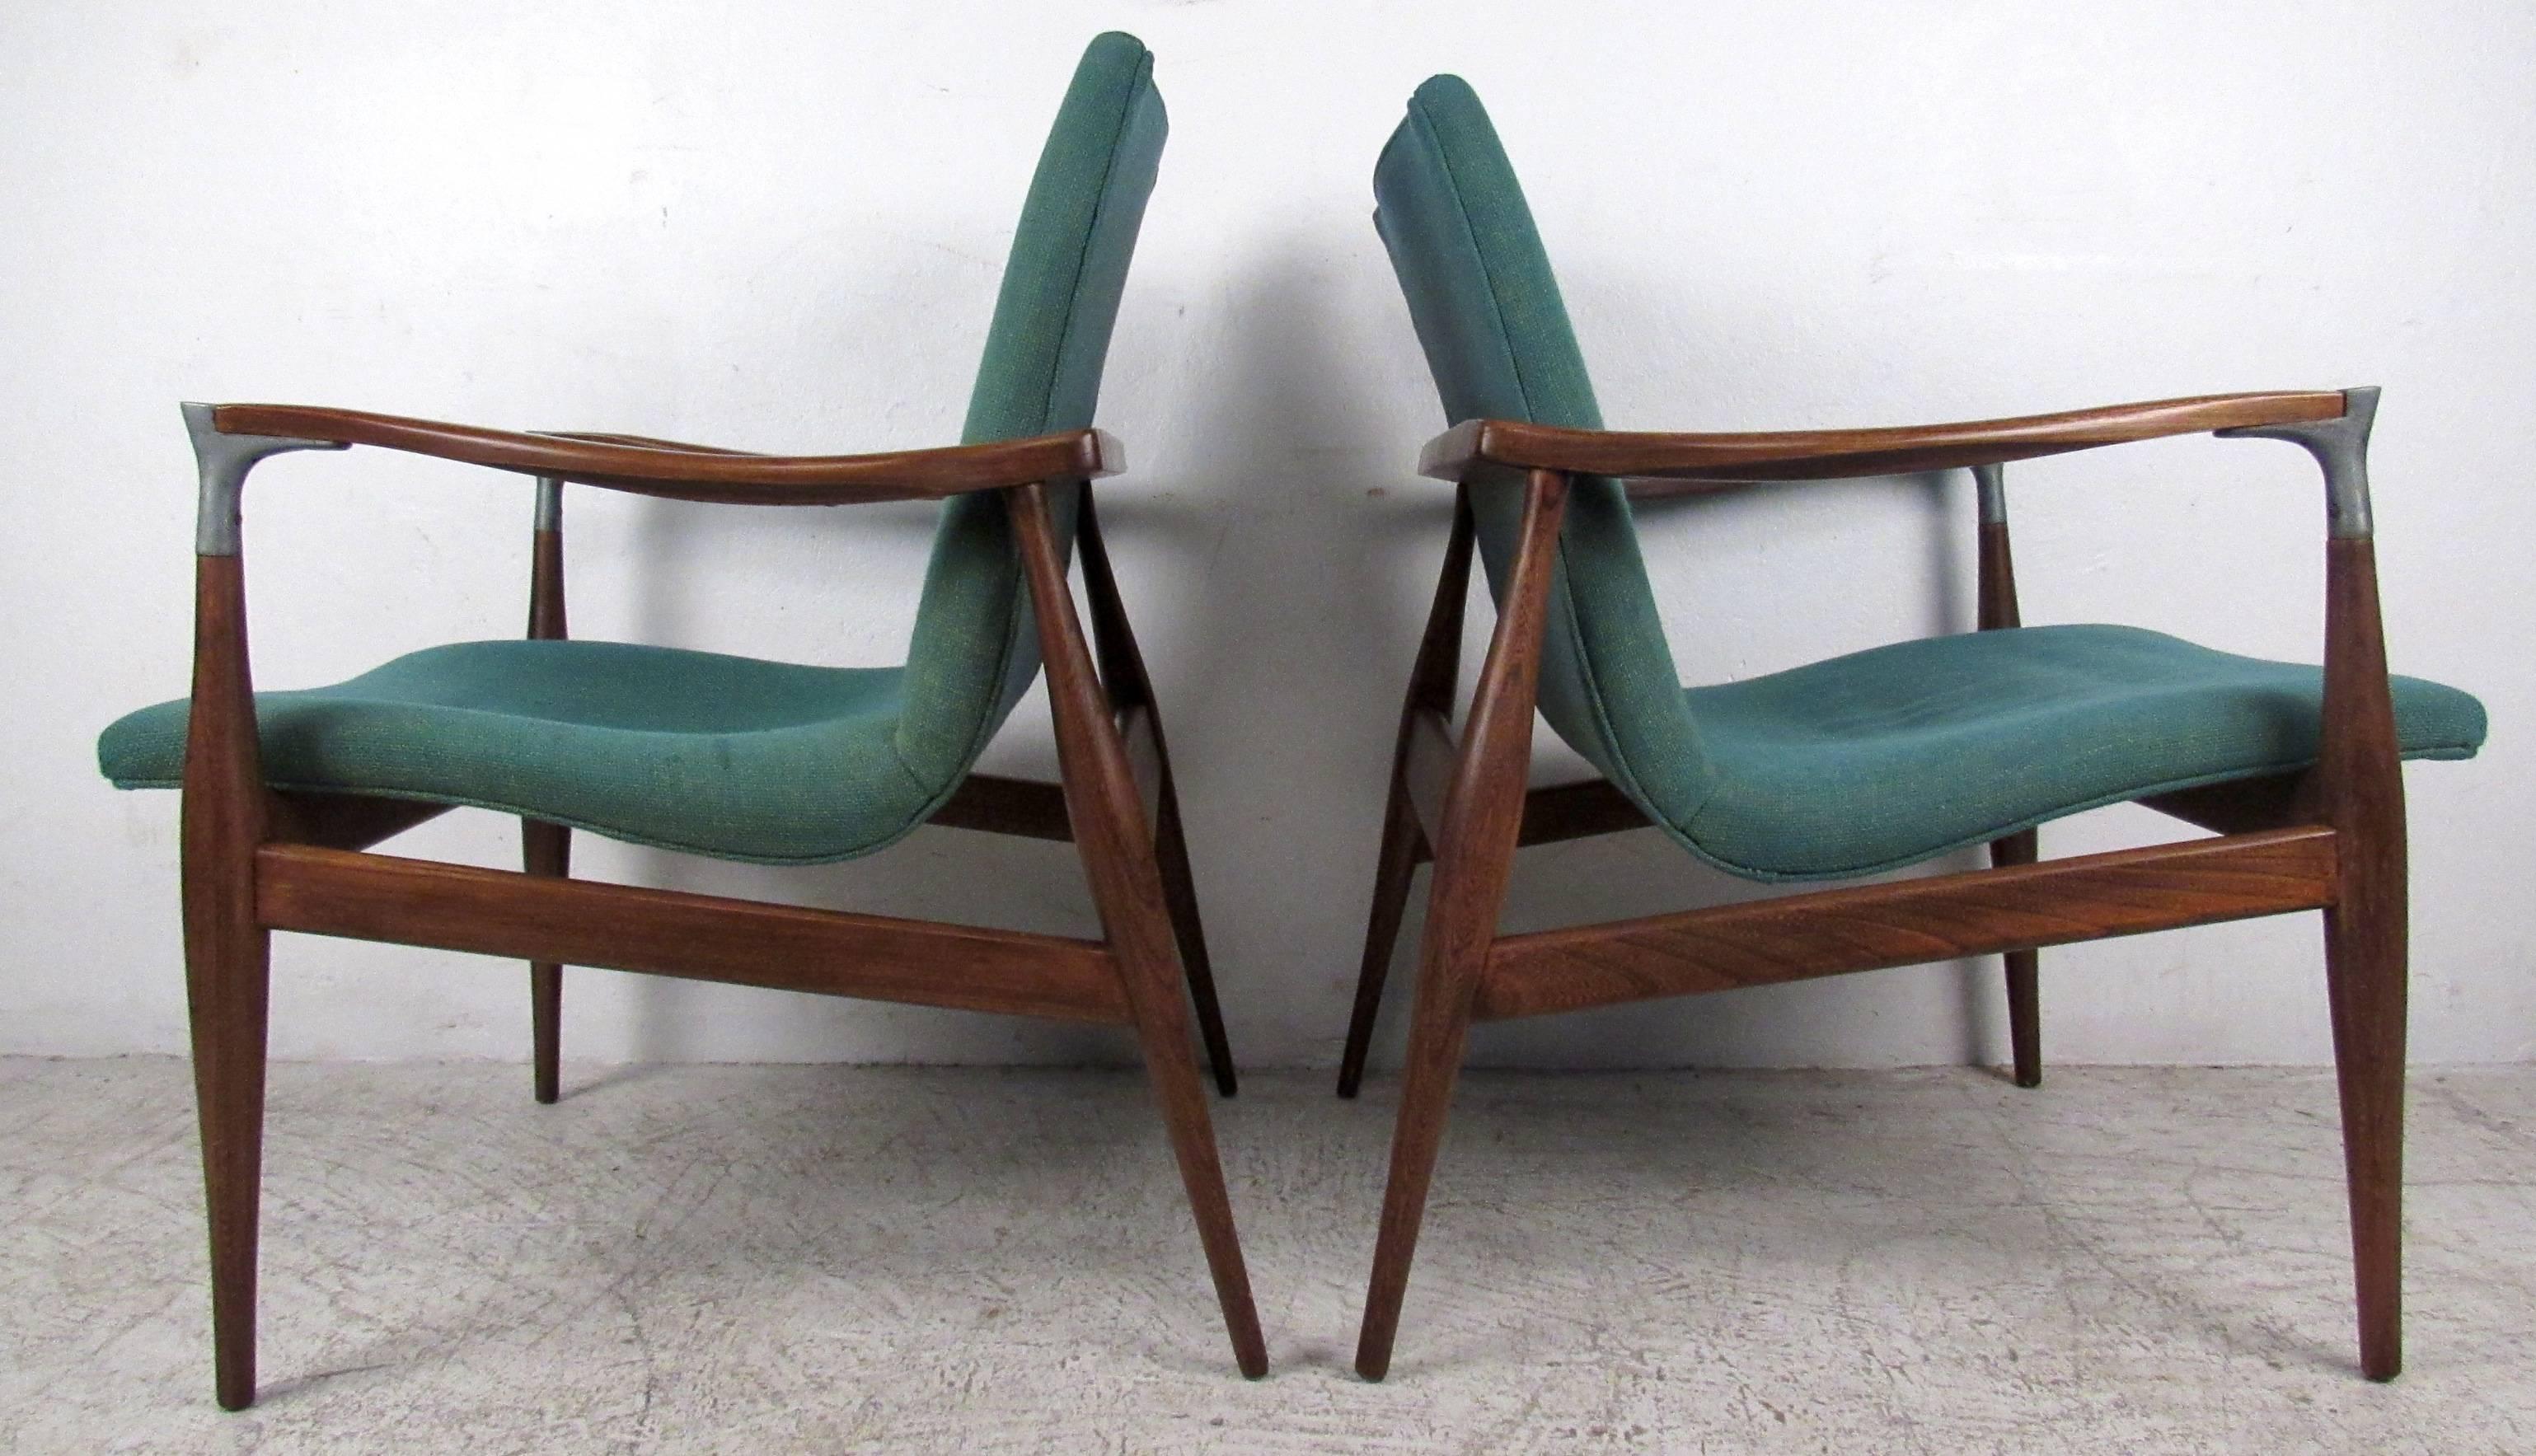 Two vintage-modern walnut side chairs featuring floating seat, sculpted armrests with metal trim and upholstered seats.

Please confirm item location NY or NJ with dealer.